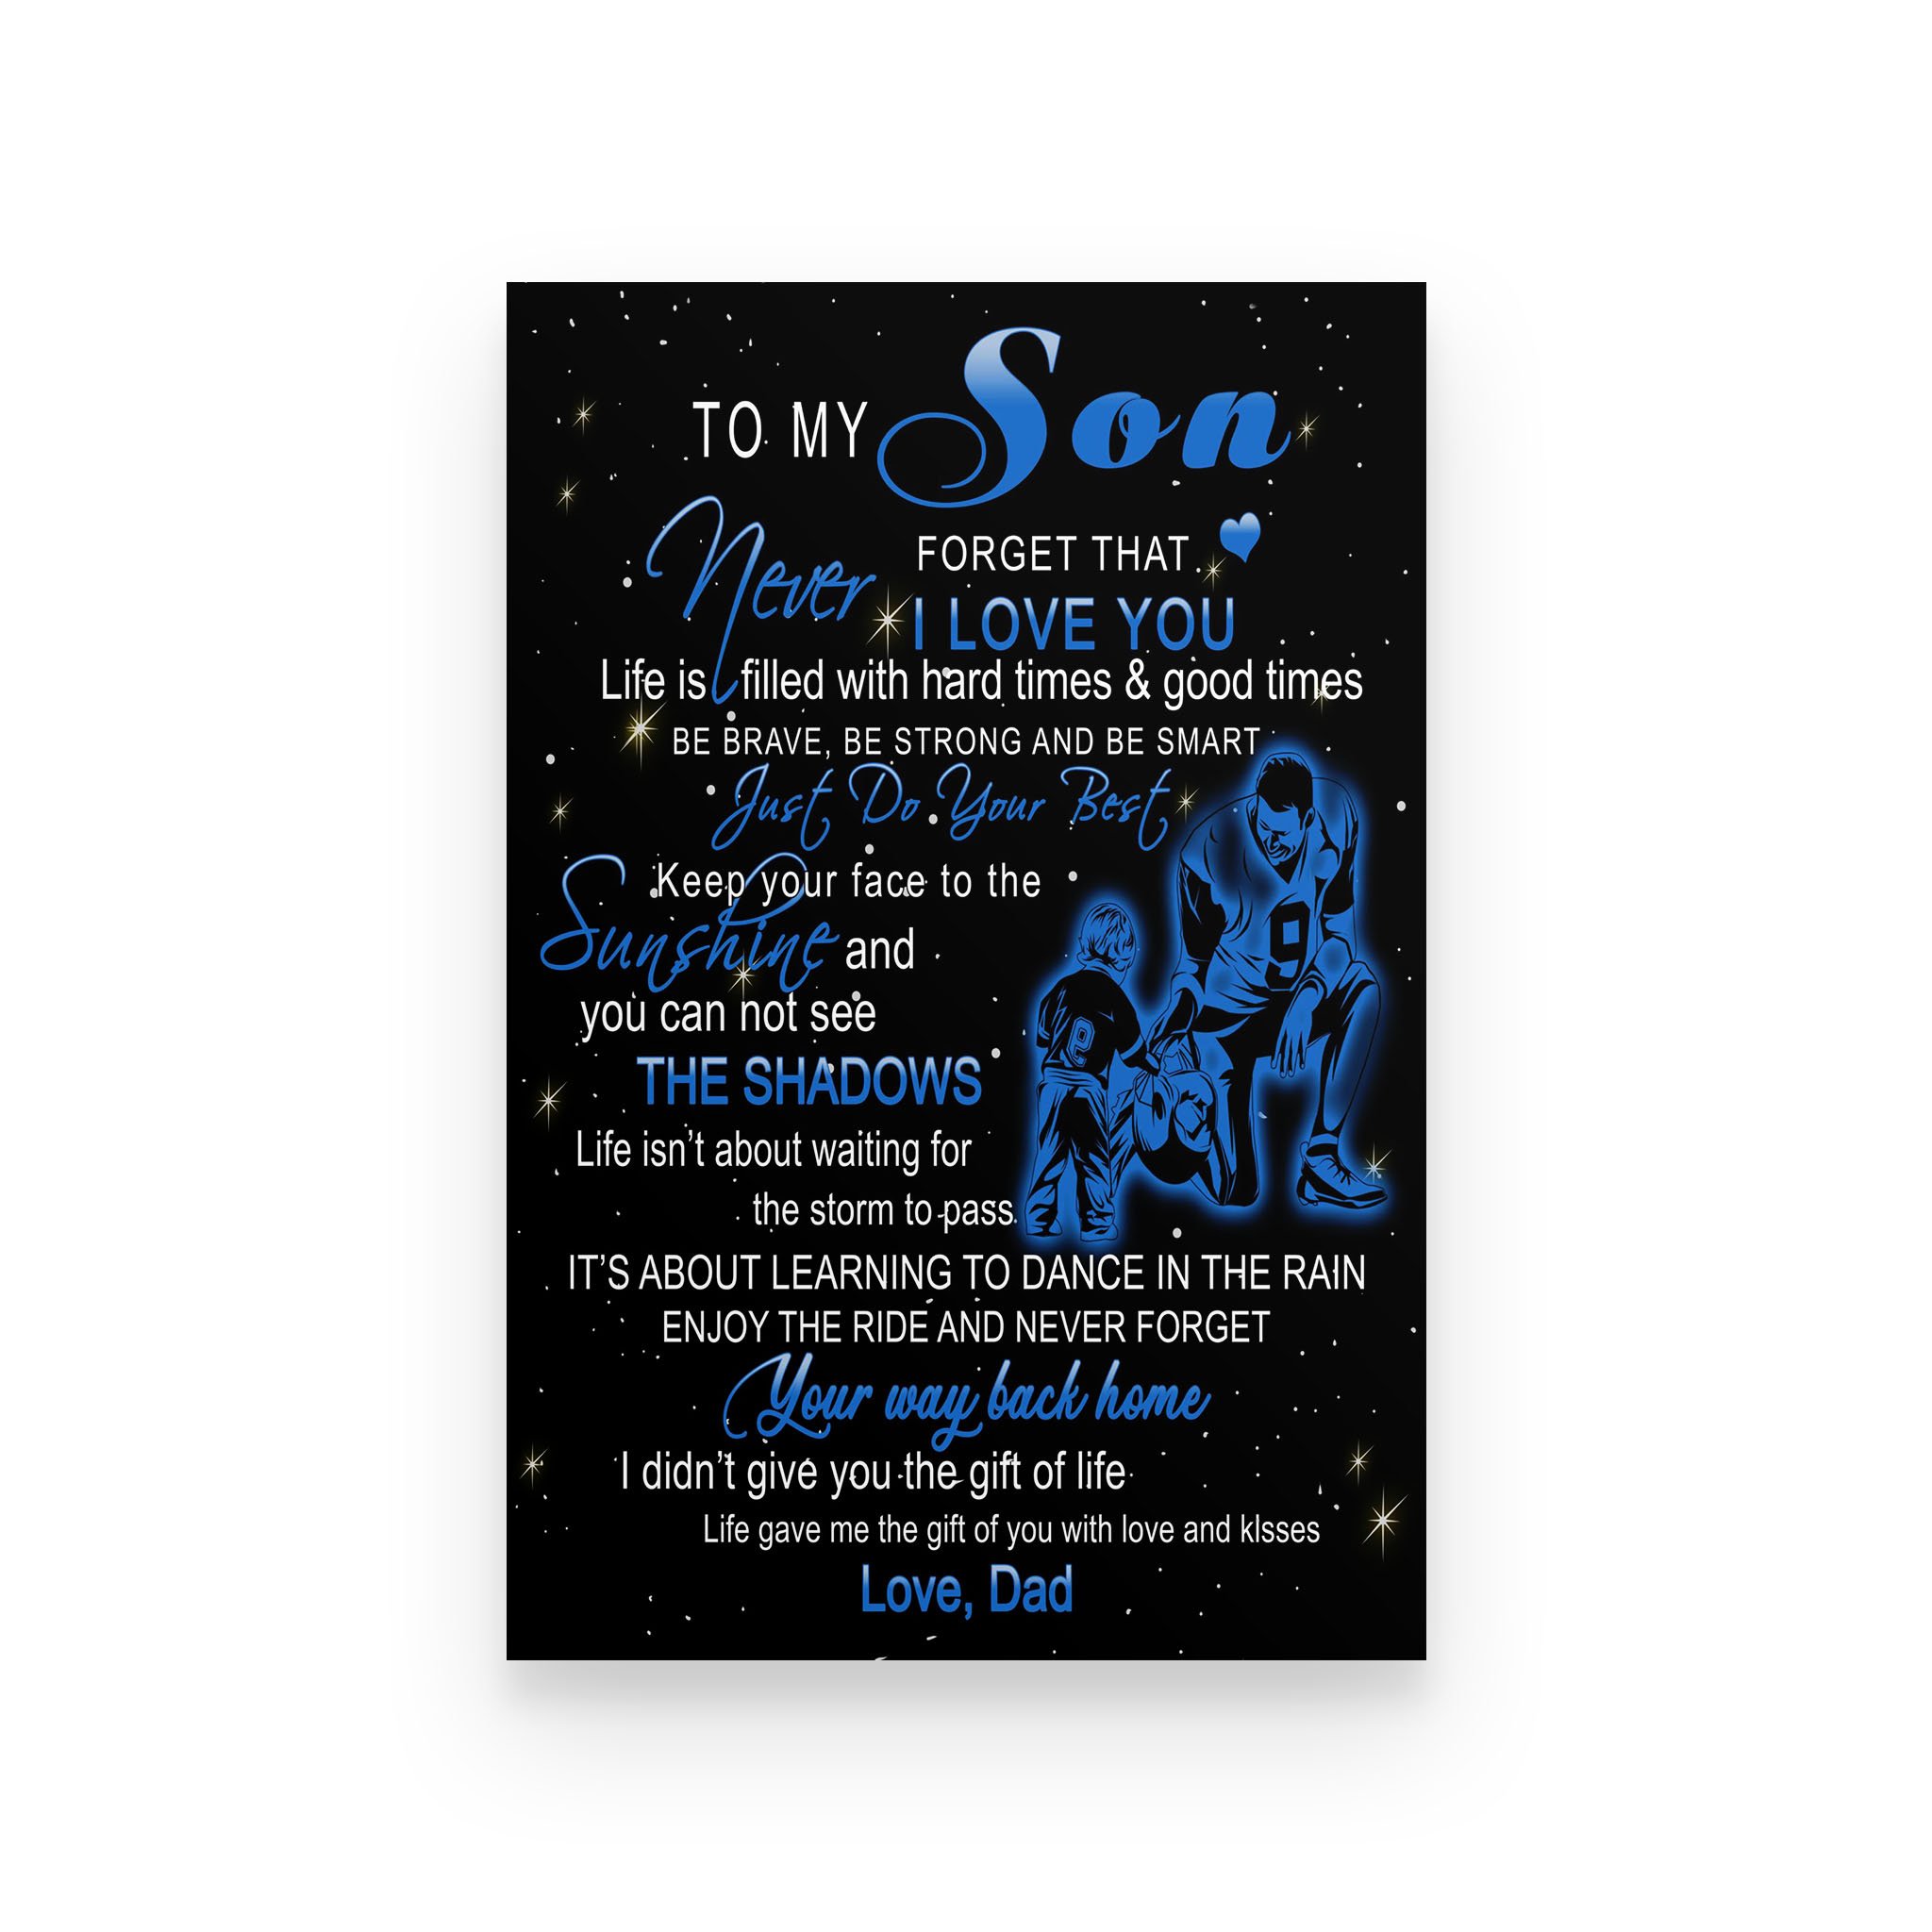 American football poster dad to sonnever forget that I love you